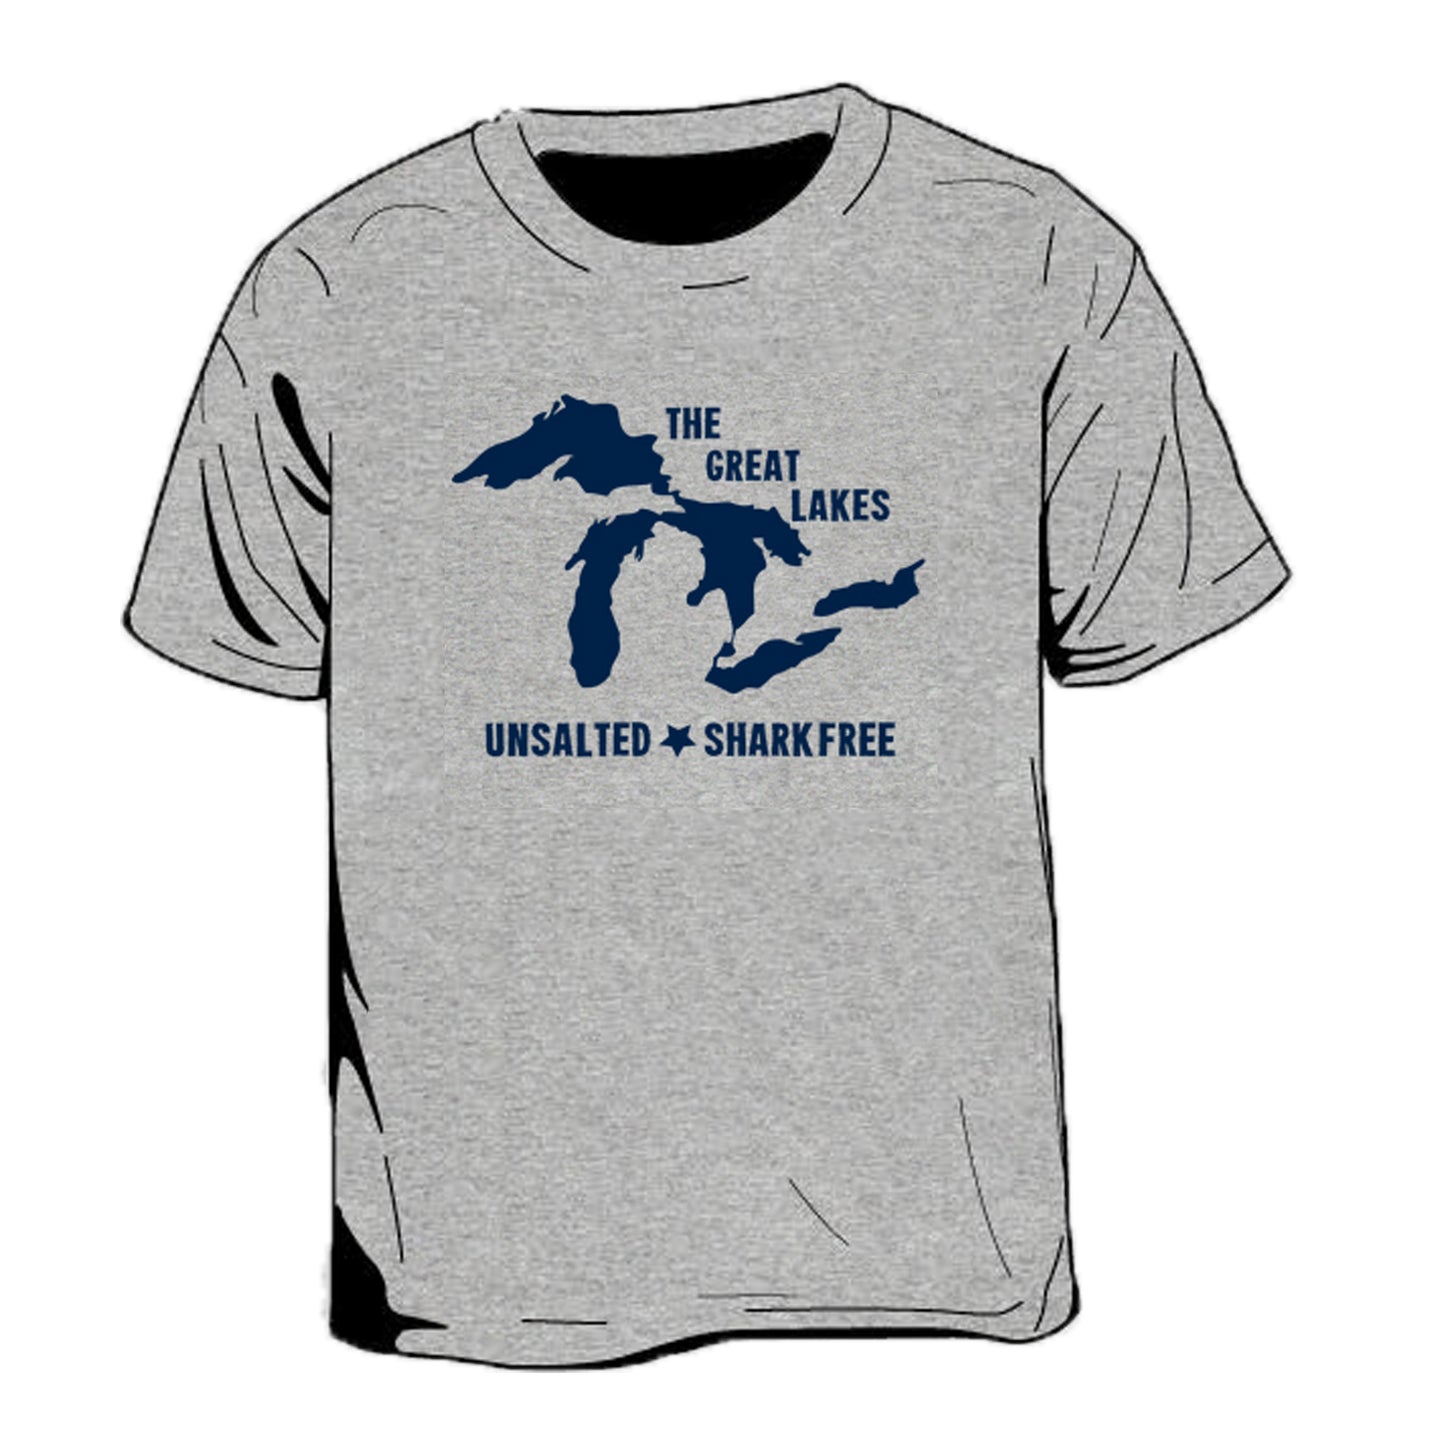 Great Lakes Unsalted Kid's T-Shirt